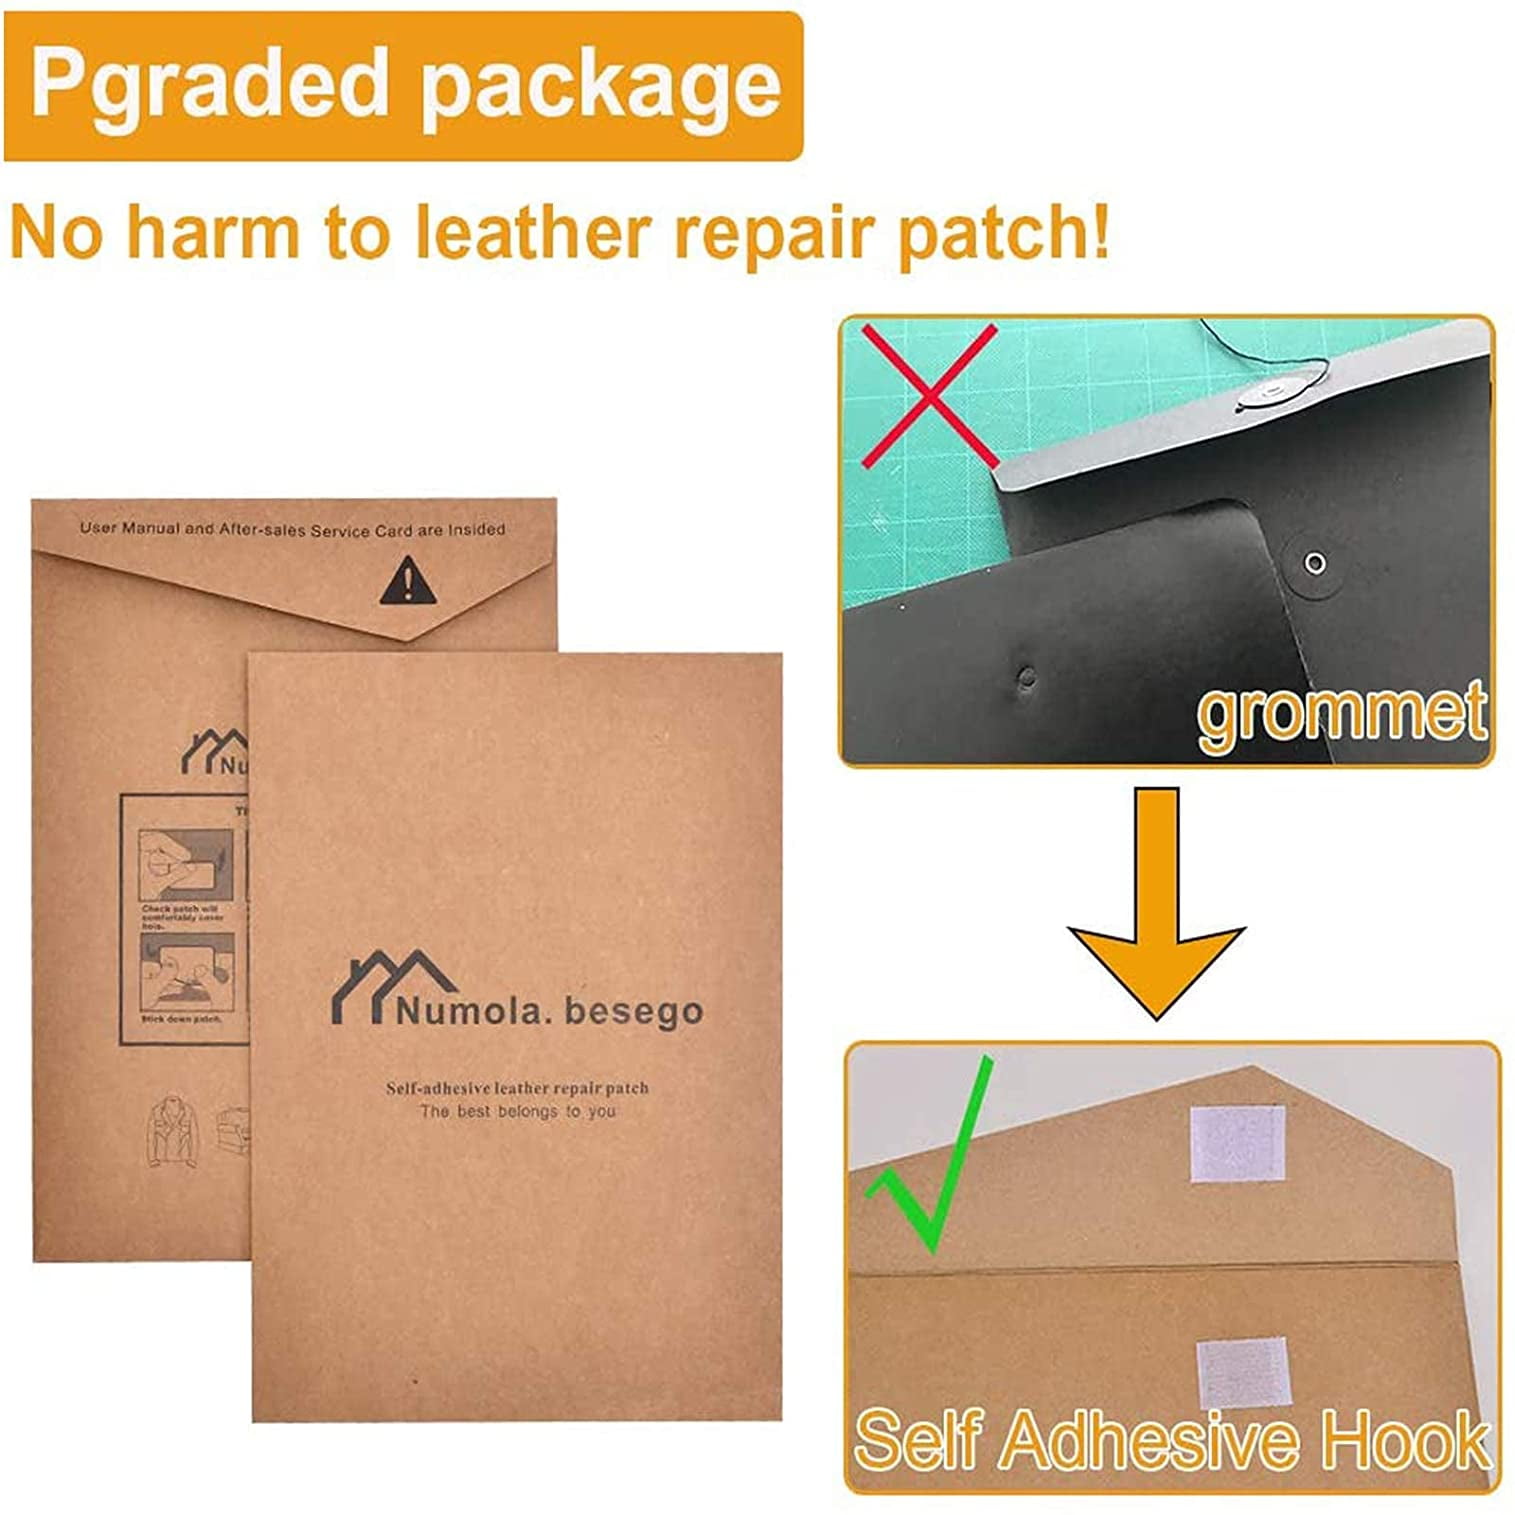 Memotoo Leather Repair Patch, Vinyl Kit, Self-Adhesive Leather Repair Tape for Sofas, Drivers Car Seat, Couch, Handbags, Jackets (Light Brown, 8×11 inch)… -